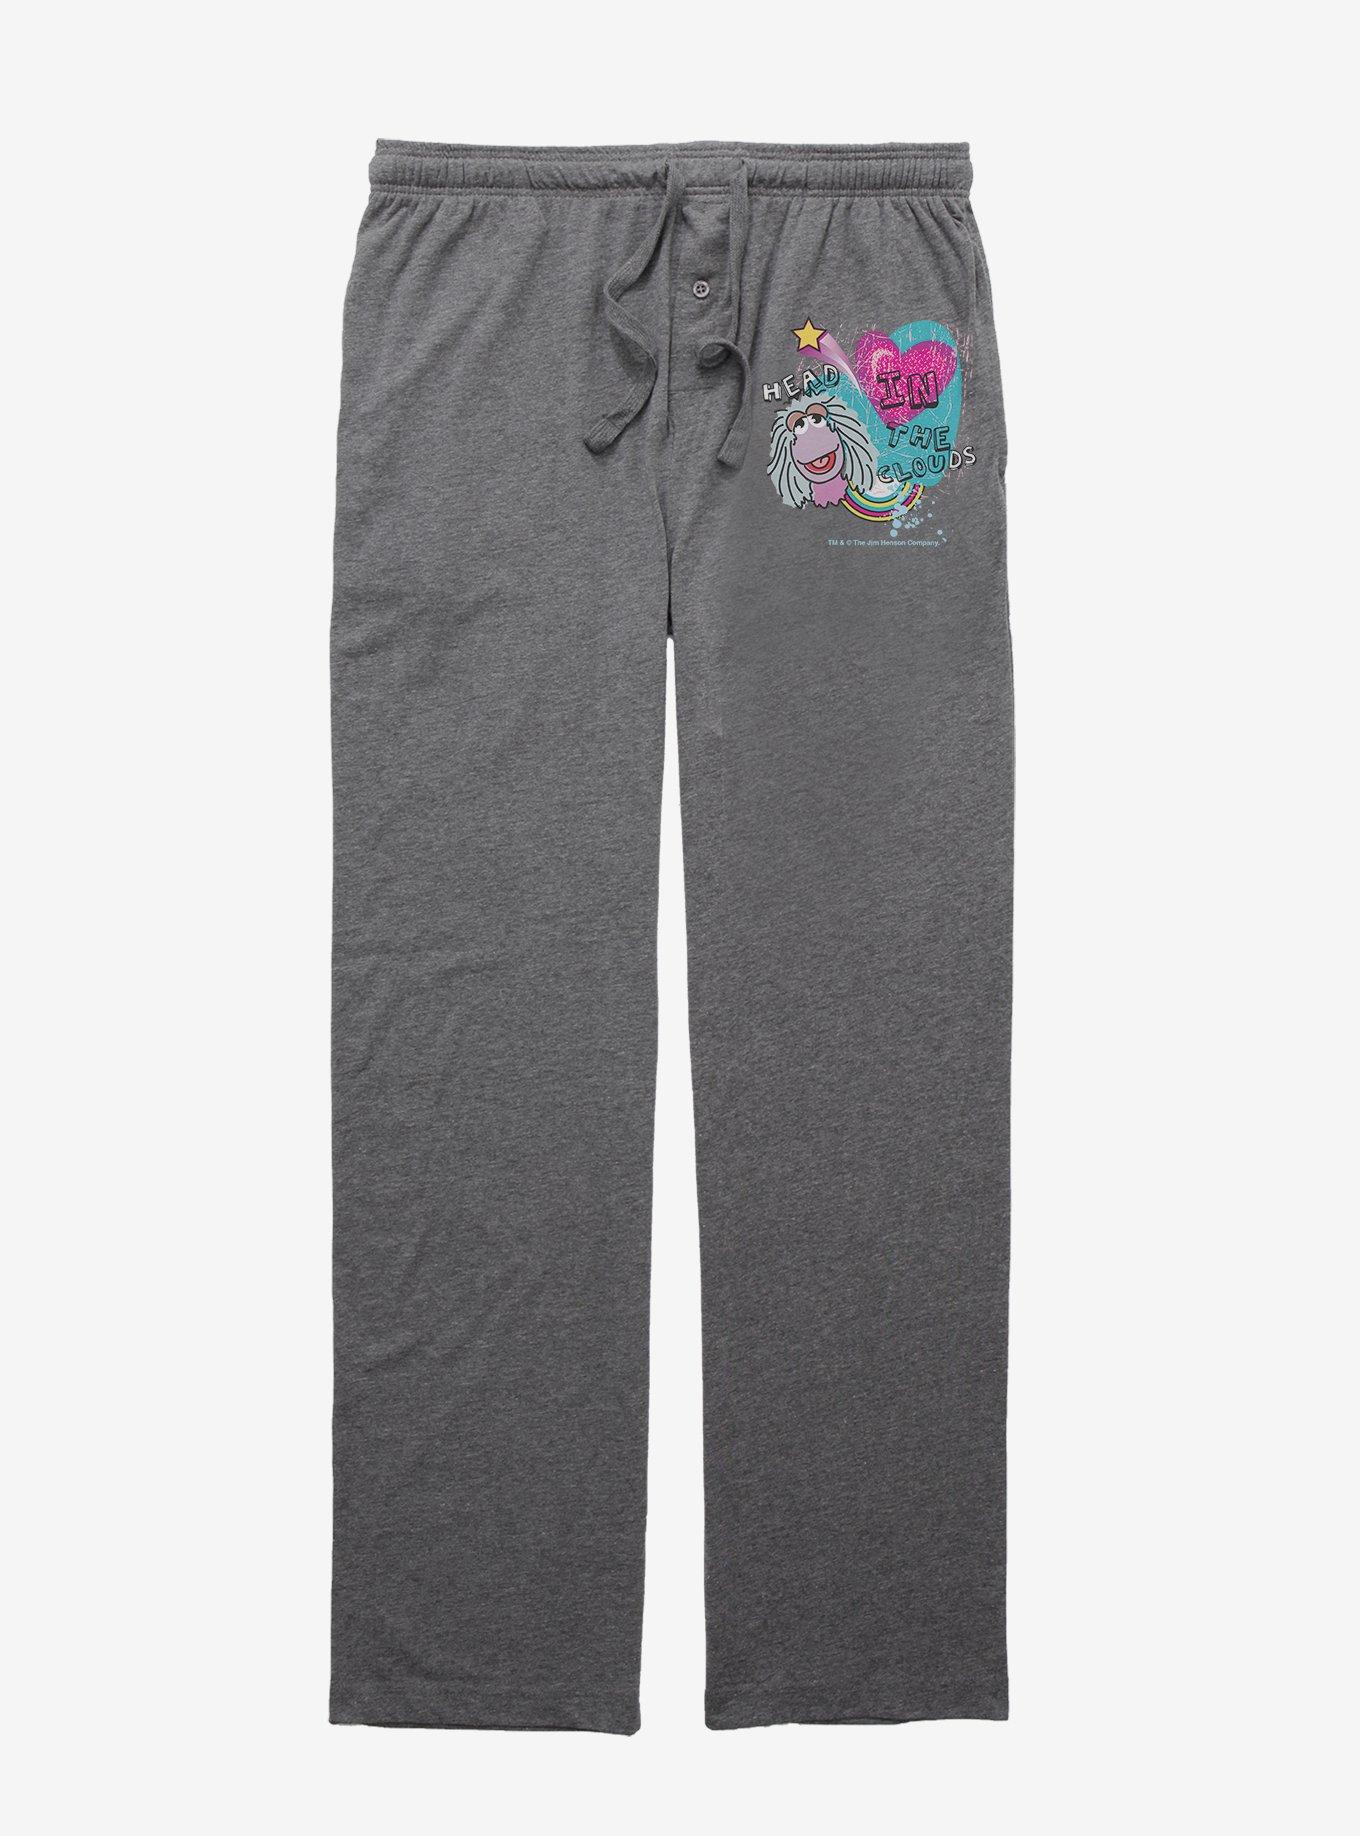 Jim Henson's Fraggle Rock In The Clouds Pajama Pants, GRAPHITE HEATHER, hi-res